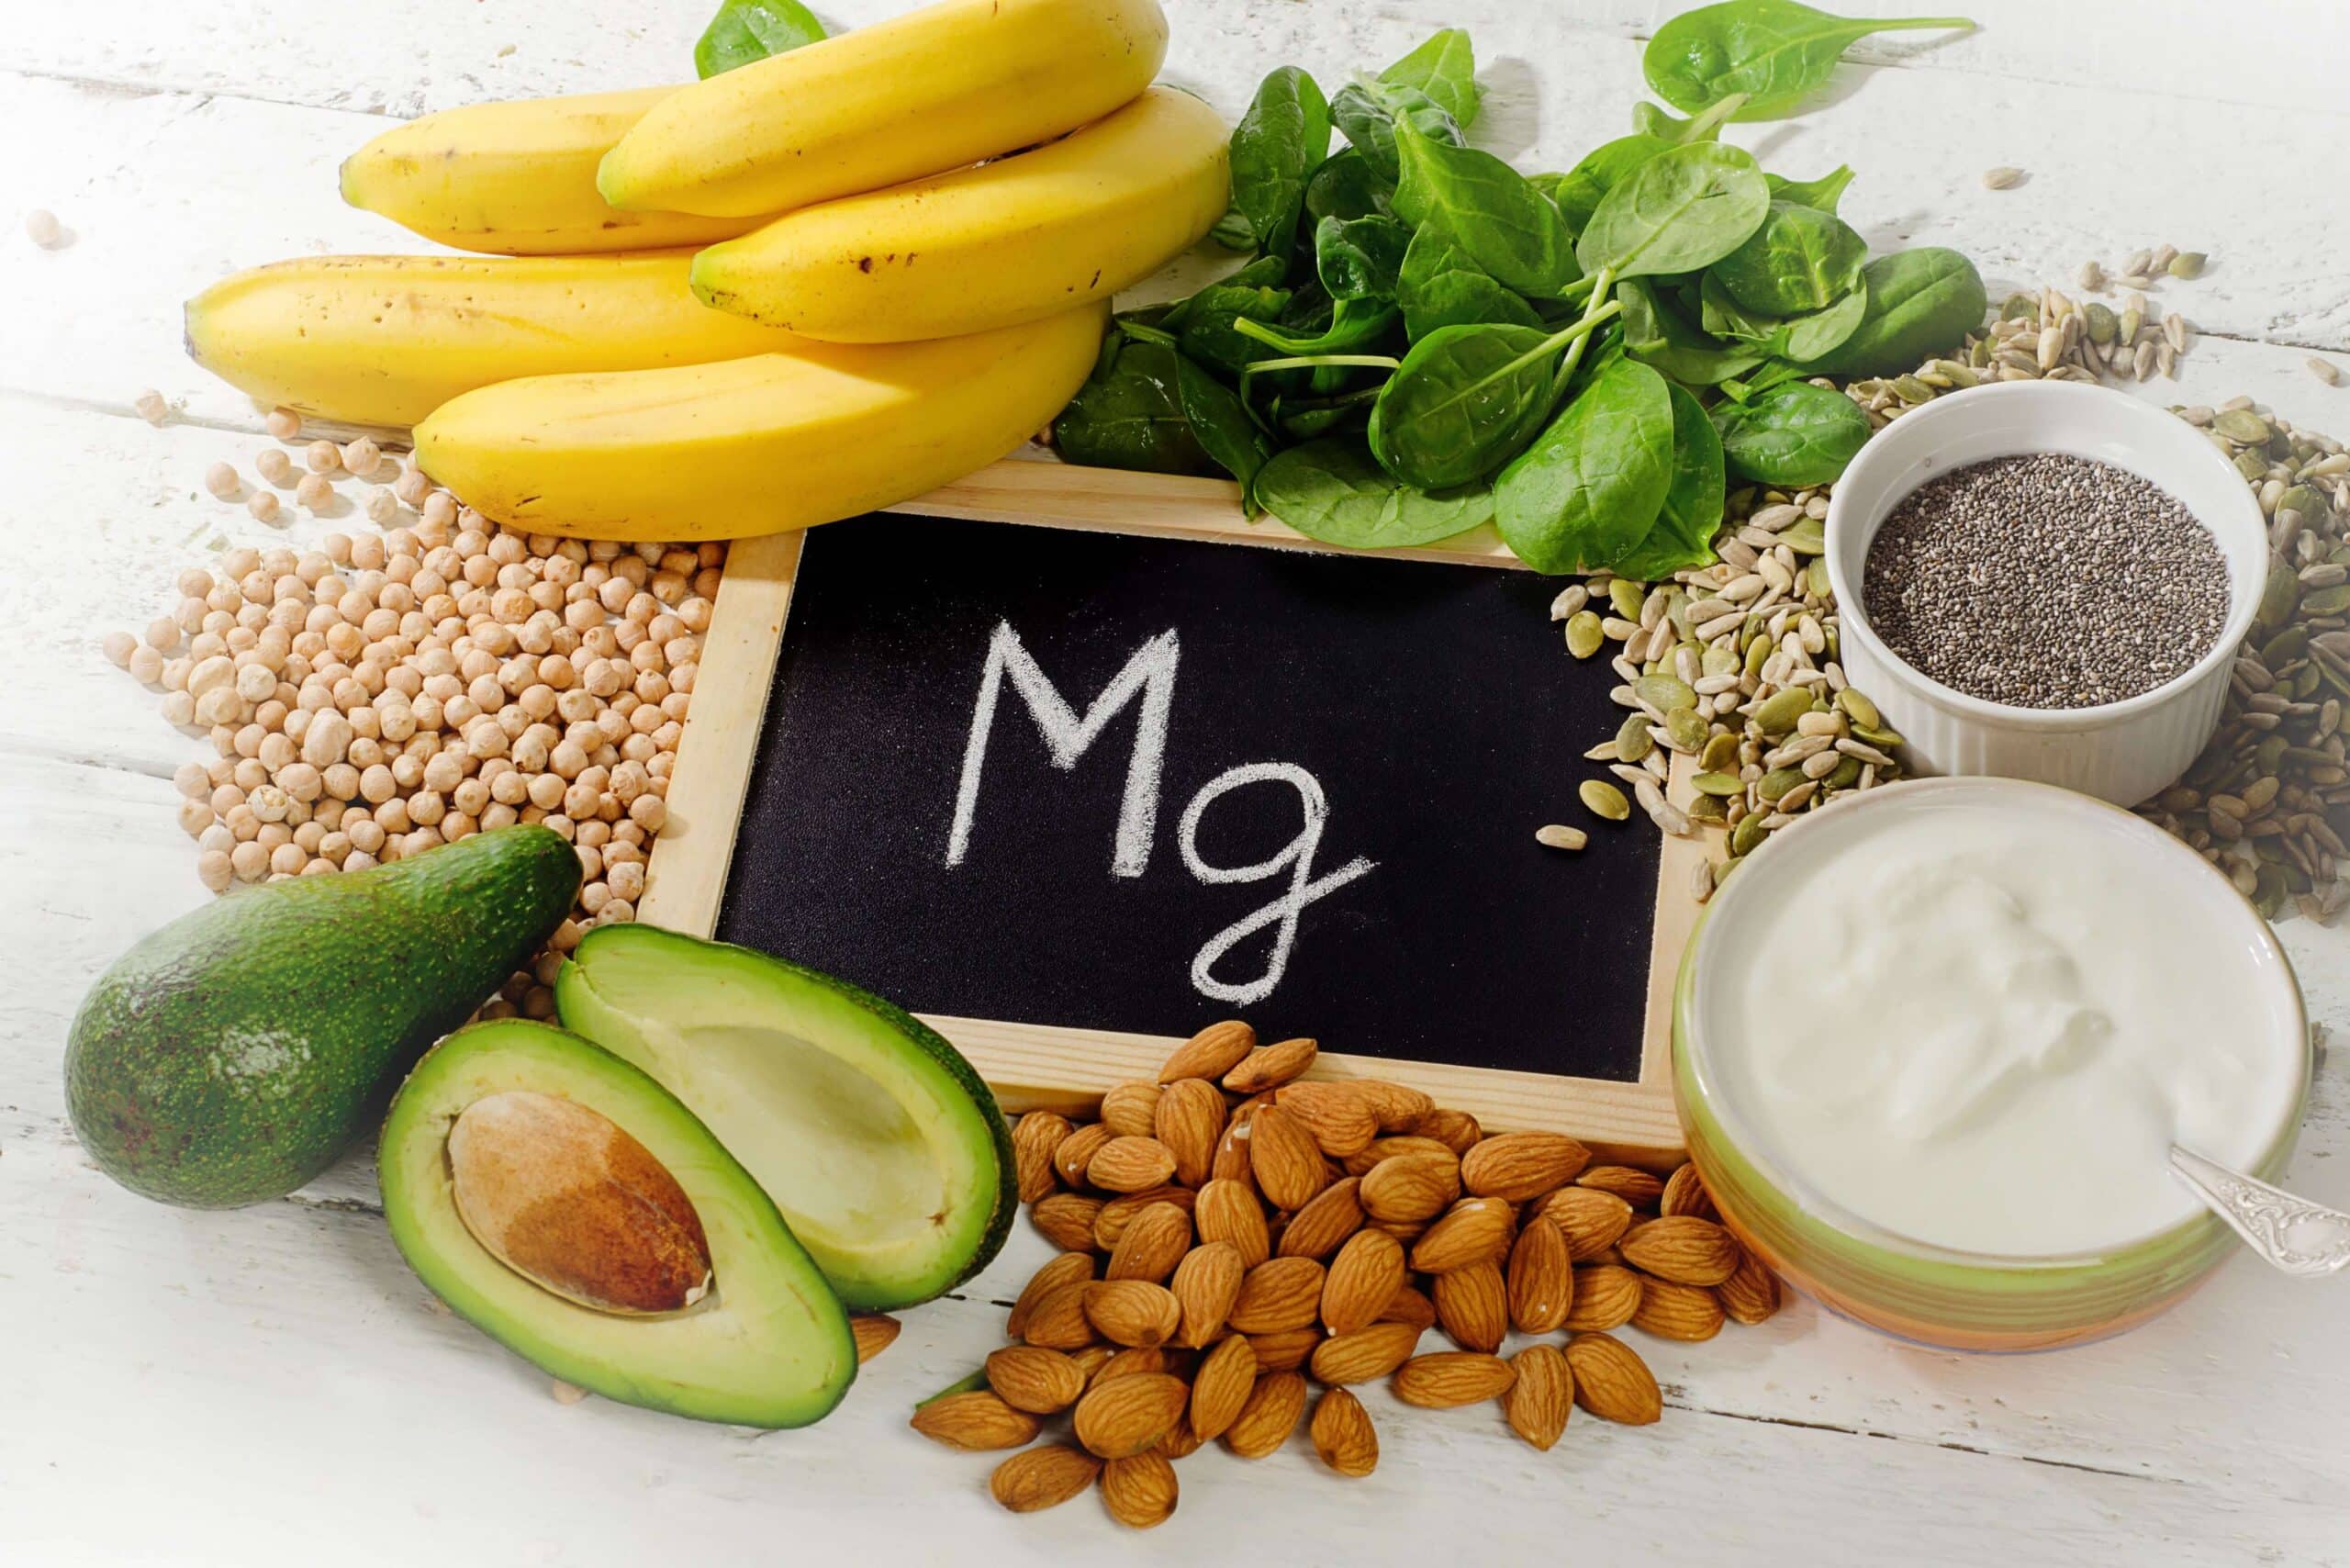 8 Magnesium rich foods that you need to include in your diet